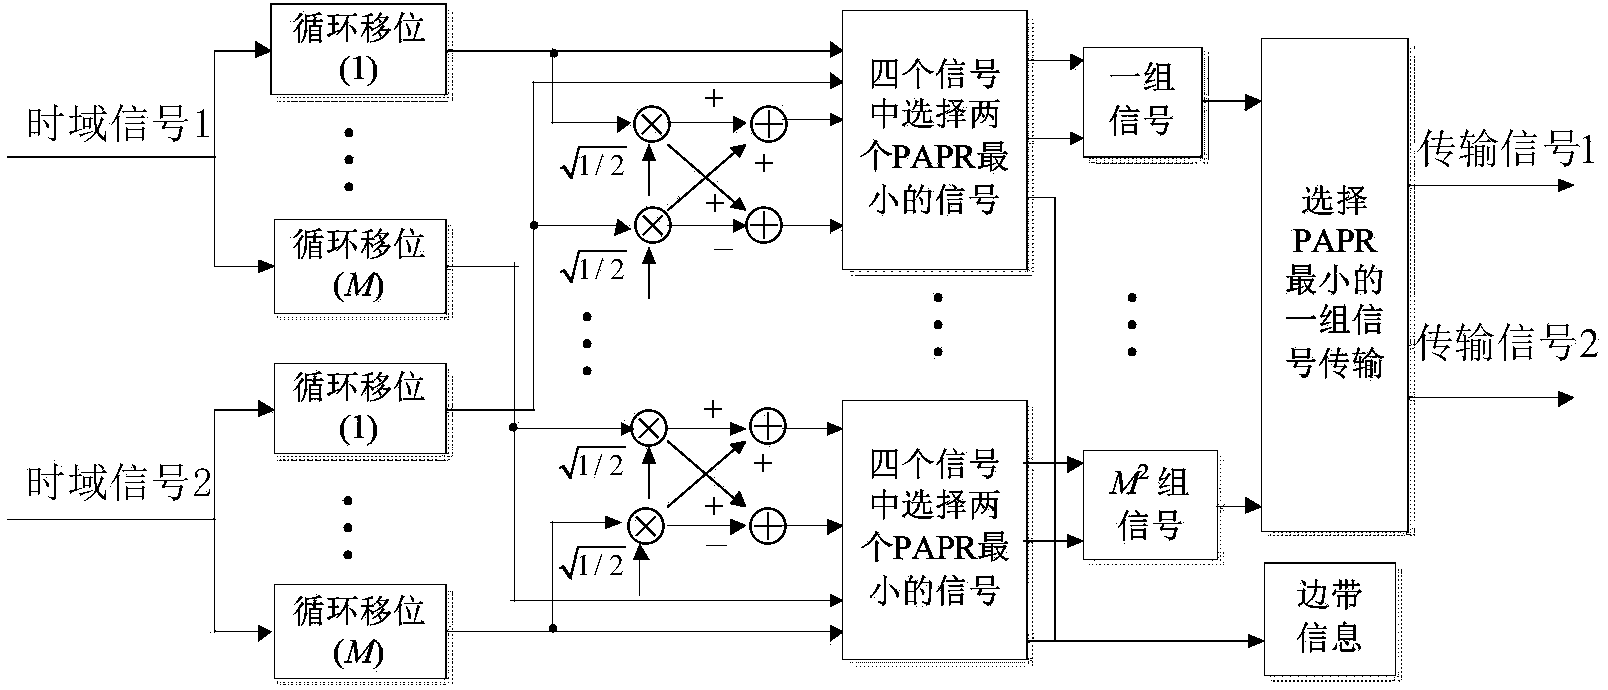 SLM (selective mapping) method for reducing PAPR (peak to average power ratio) of MIMO-OFDM (multiple input multiple output-orthogonal frequency division multiplexing) system